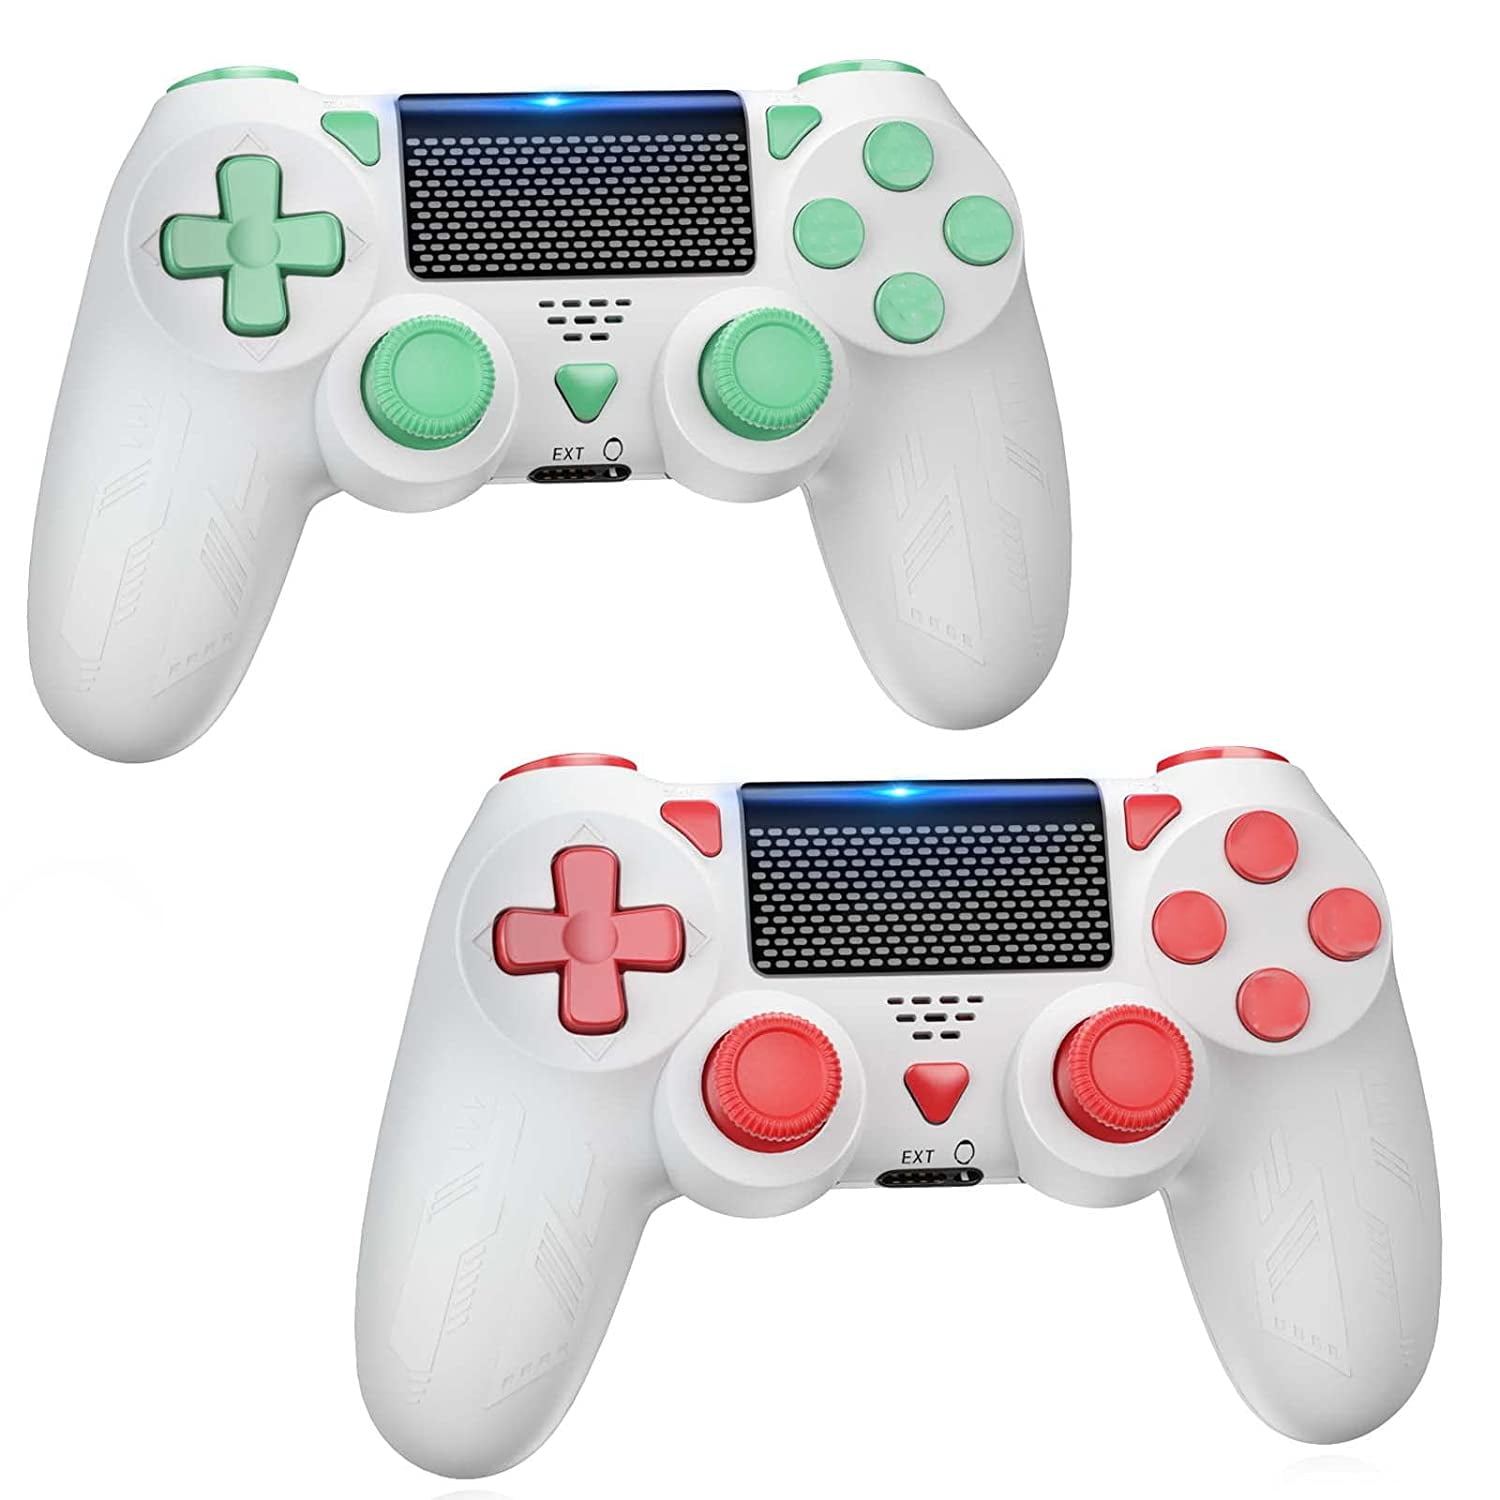 bue Fordøjelsesorgan Åh gud 2 Pack Wireless Controller for PS4, Bonadget Wireless Gamepad Compatible  with Playstation 4/ Pro/Slim,PS-4 Remote Built-in 1000mAh Battery with  Turbo/ Dual Vibration/6-Axis Motion Sensor - Walmart.com